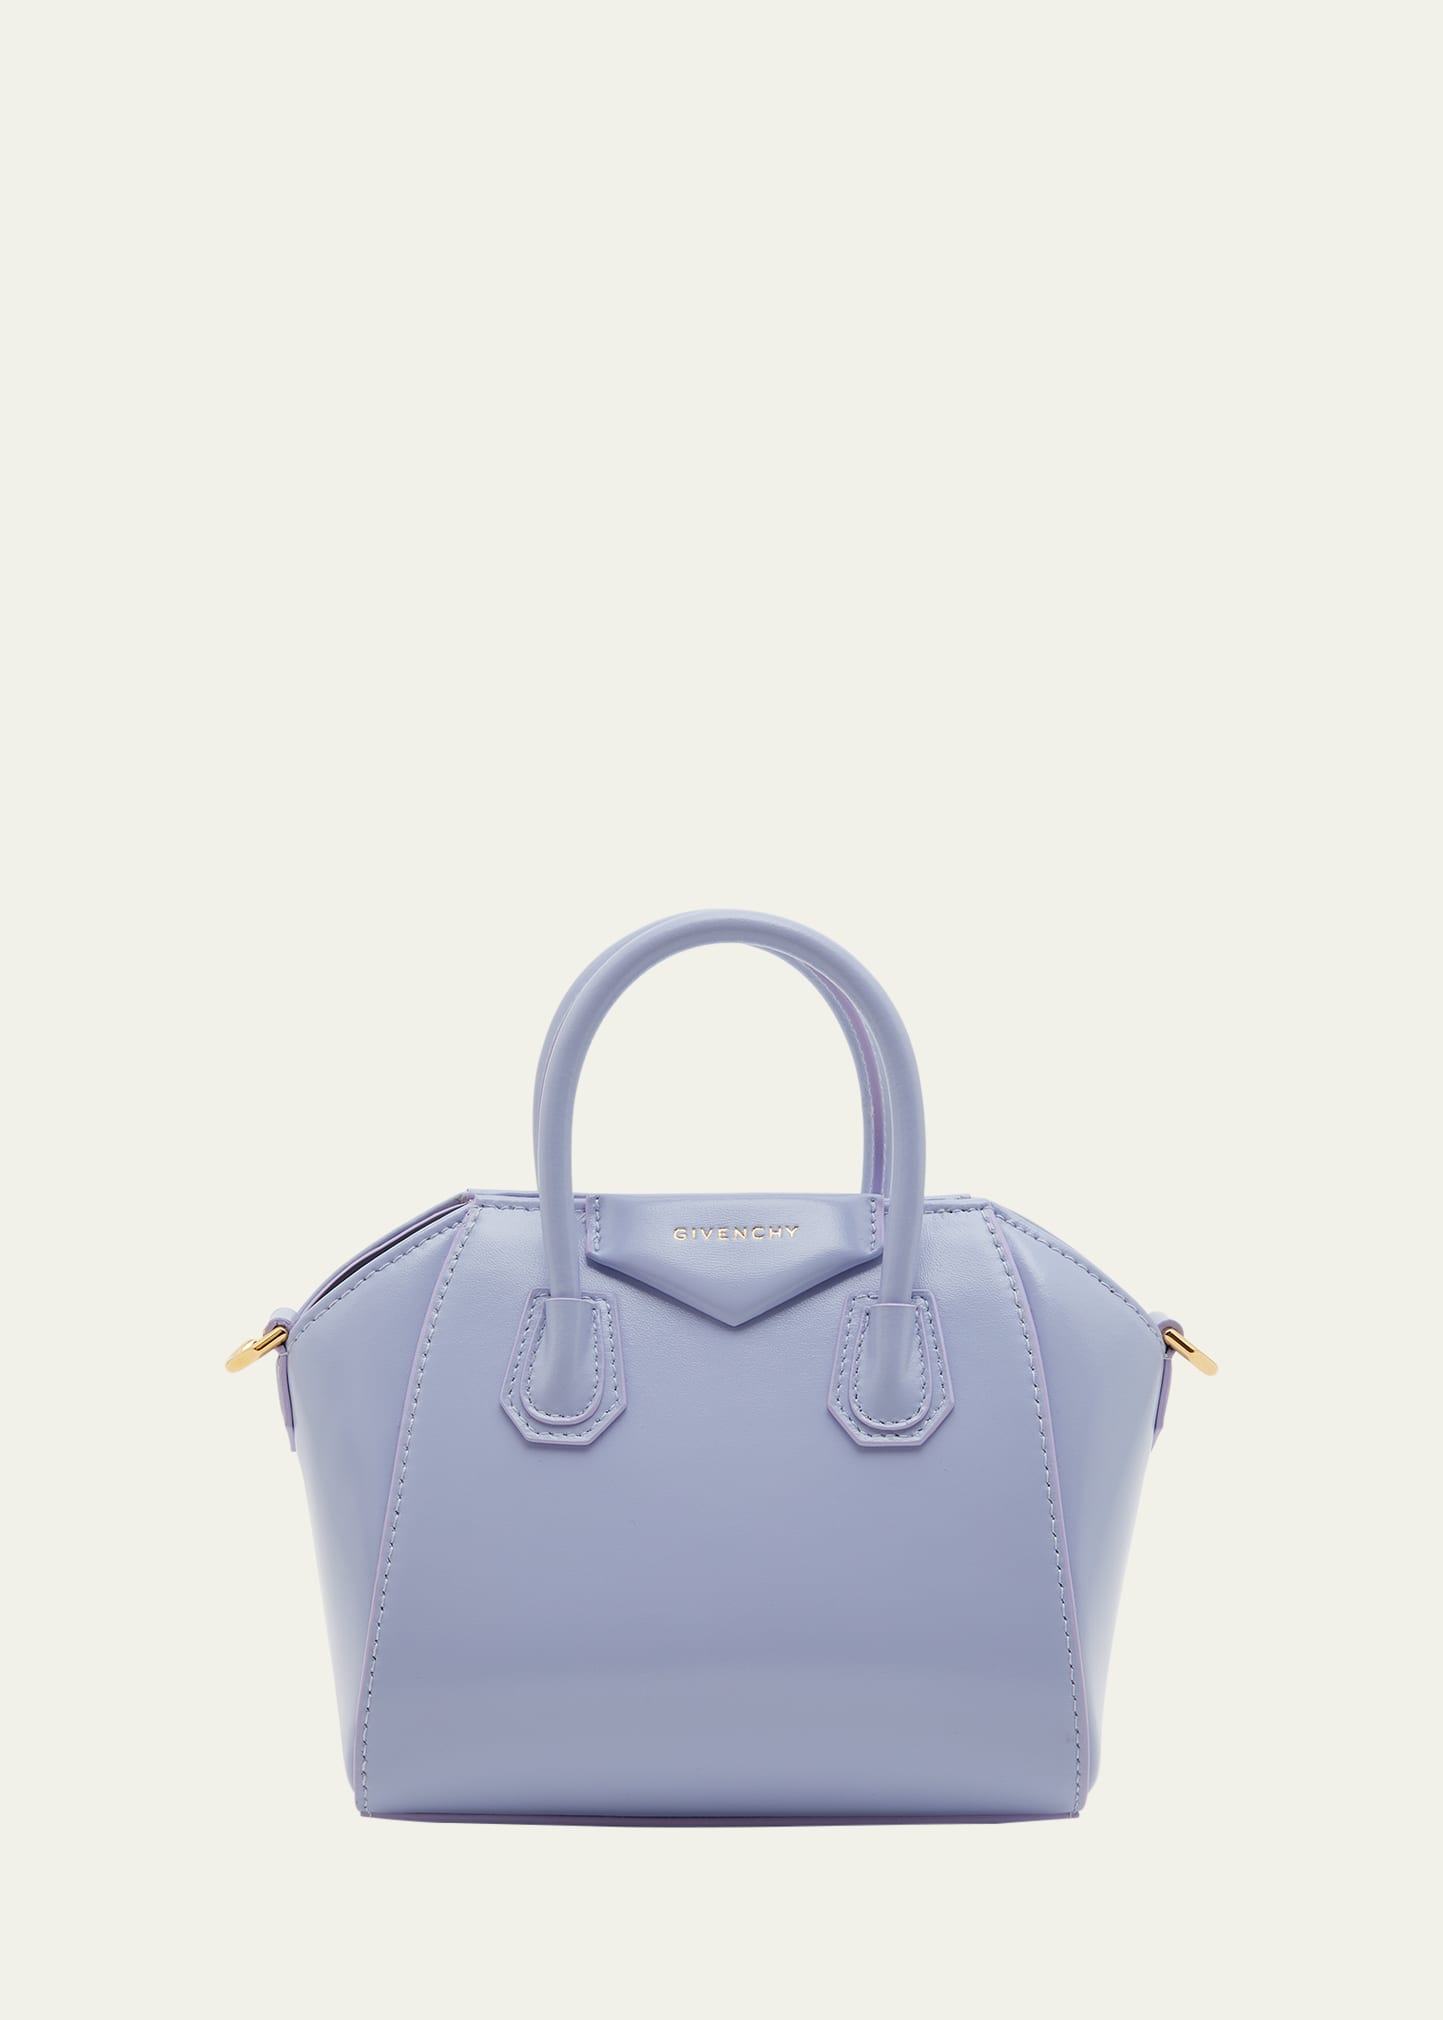 Givenchy Antigona Toy Crossbody Bag In Leather In 535 Lavender Purp